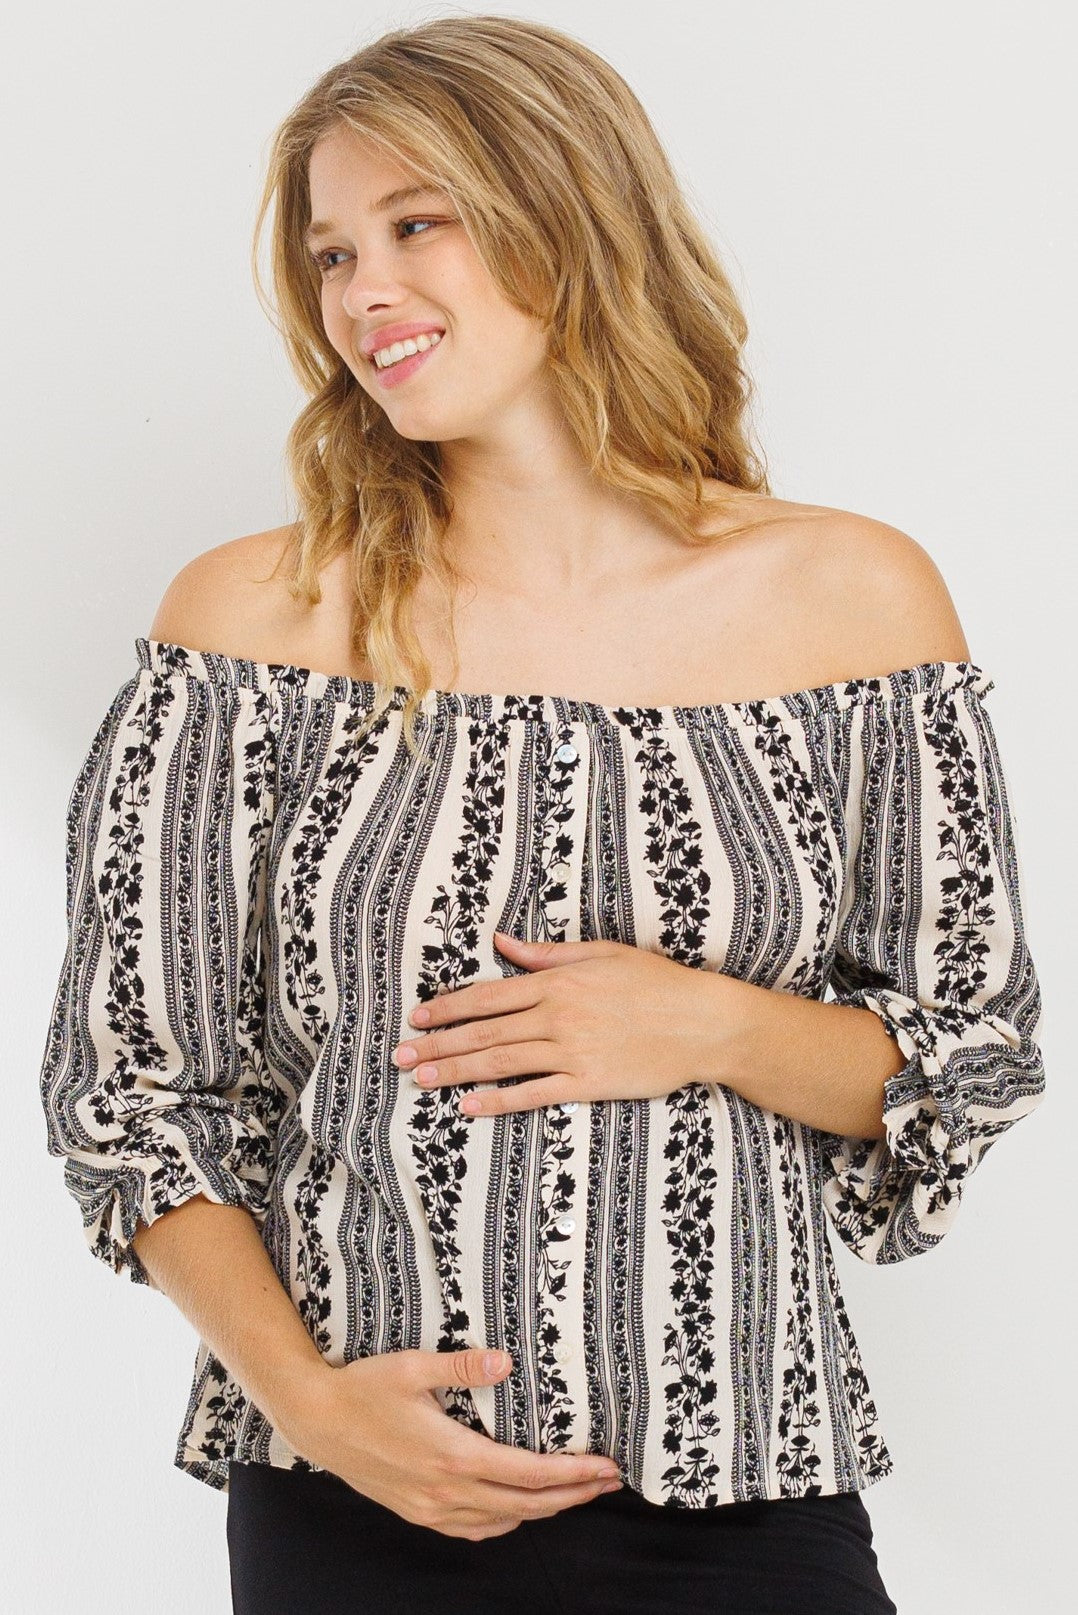 My Bump Blakely Floral Stripe Printed Button Down Top